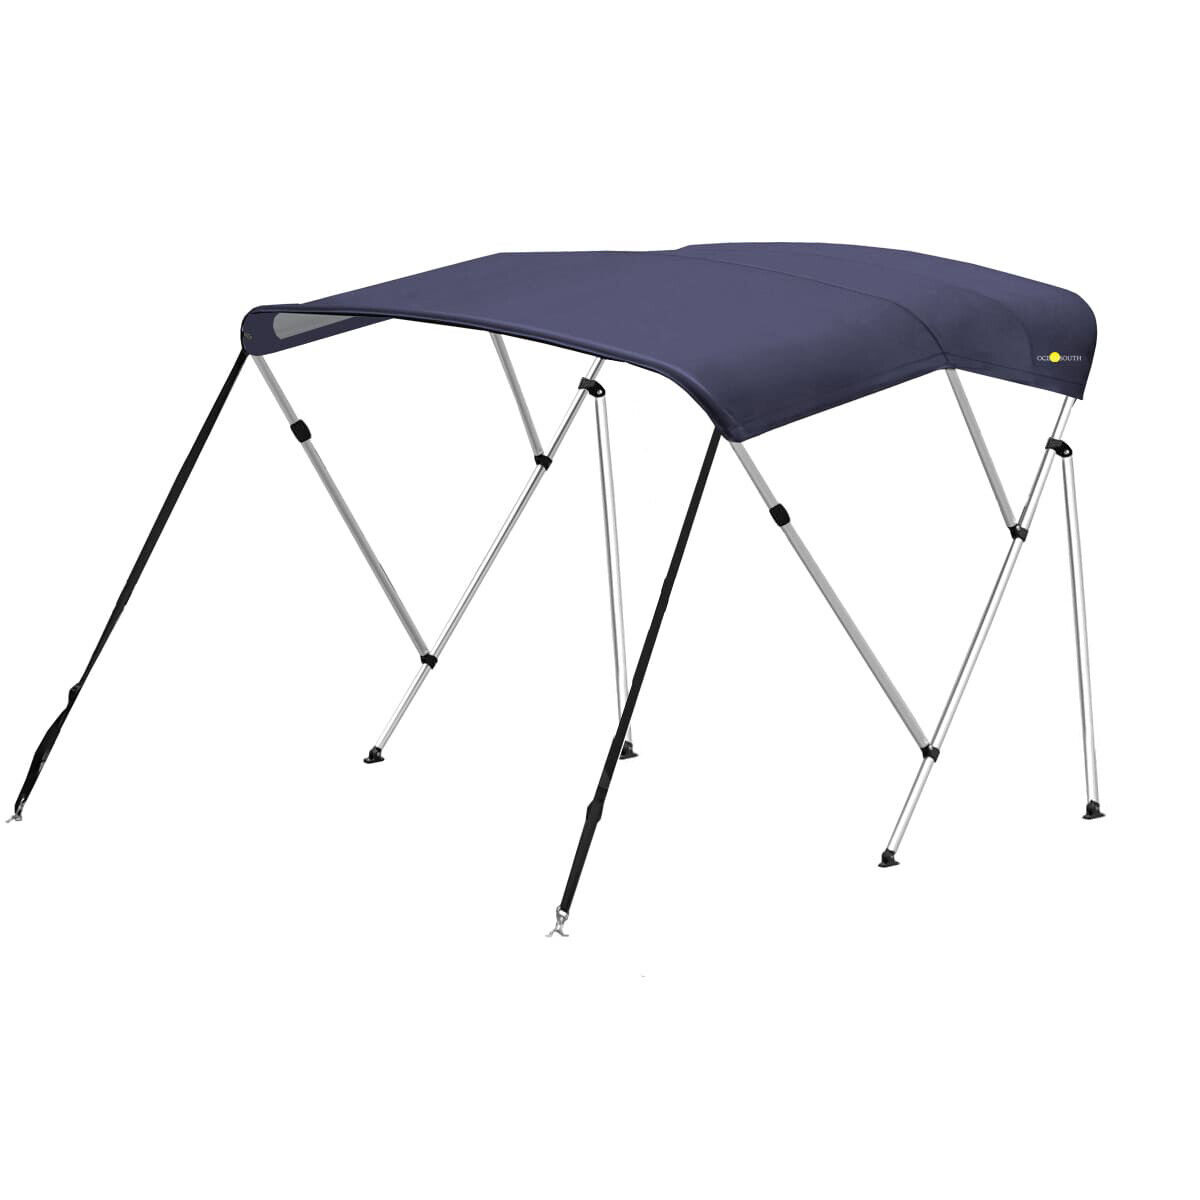 Oceansouth Standard BIMINI TOP 3 Bow Boat Cover 6ft Long With Rear Poles